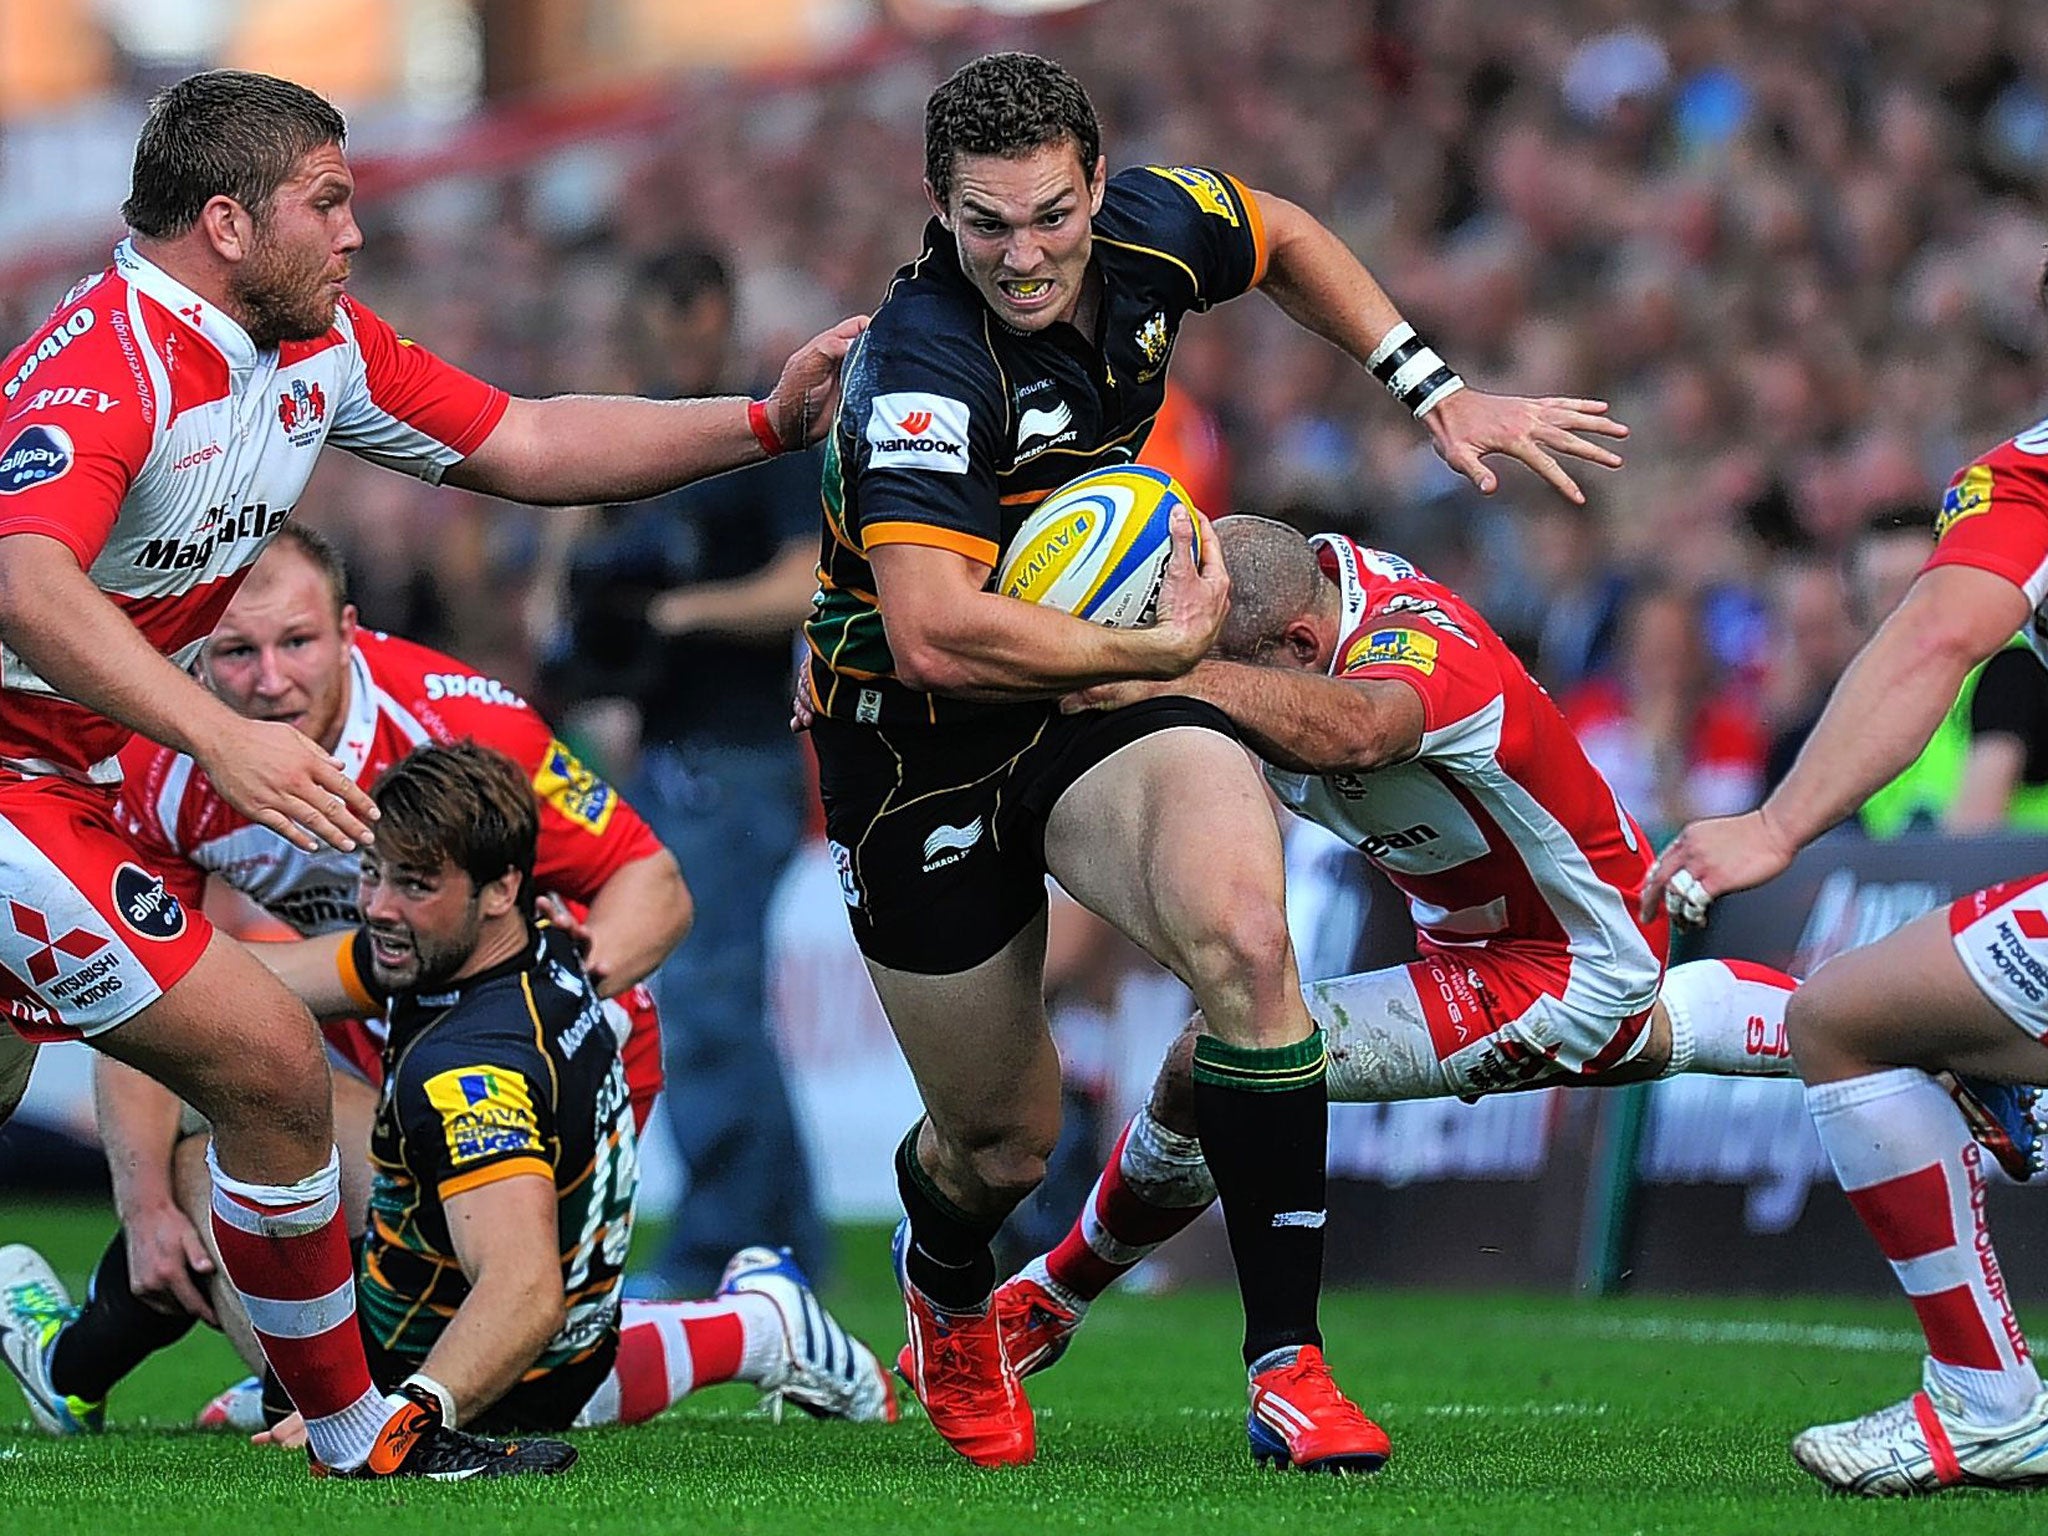 George North on the charge for Northampton in a recent game against Gloucester